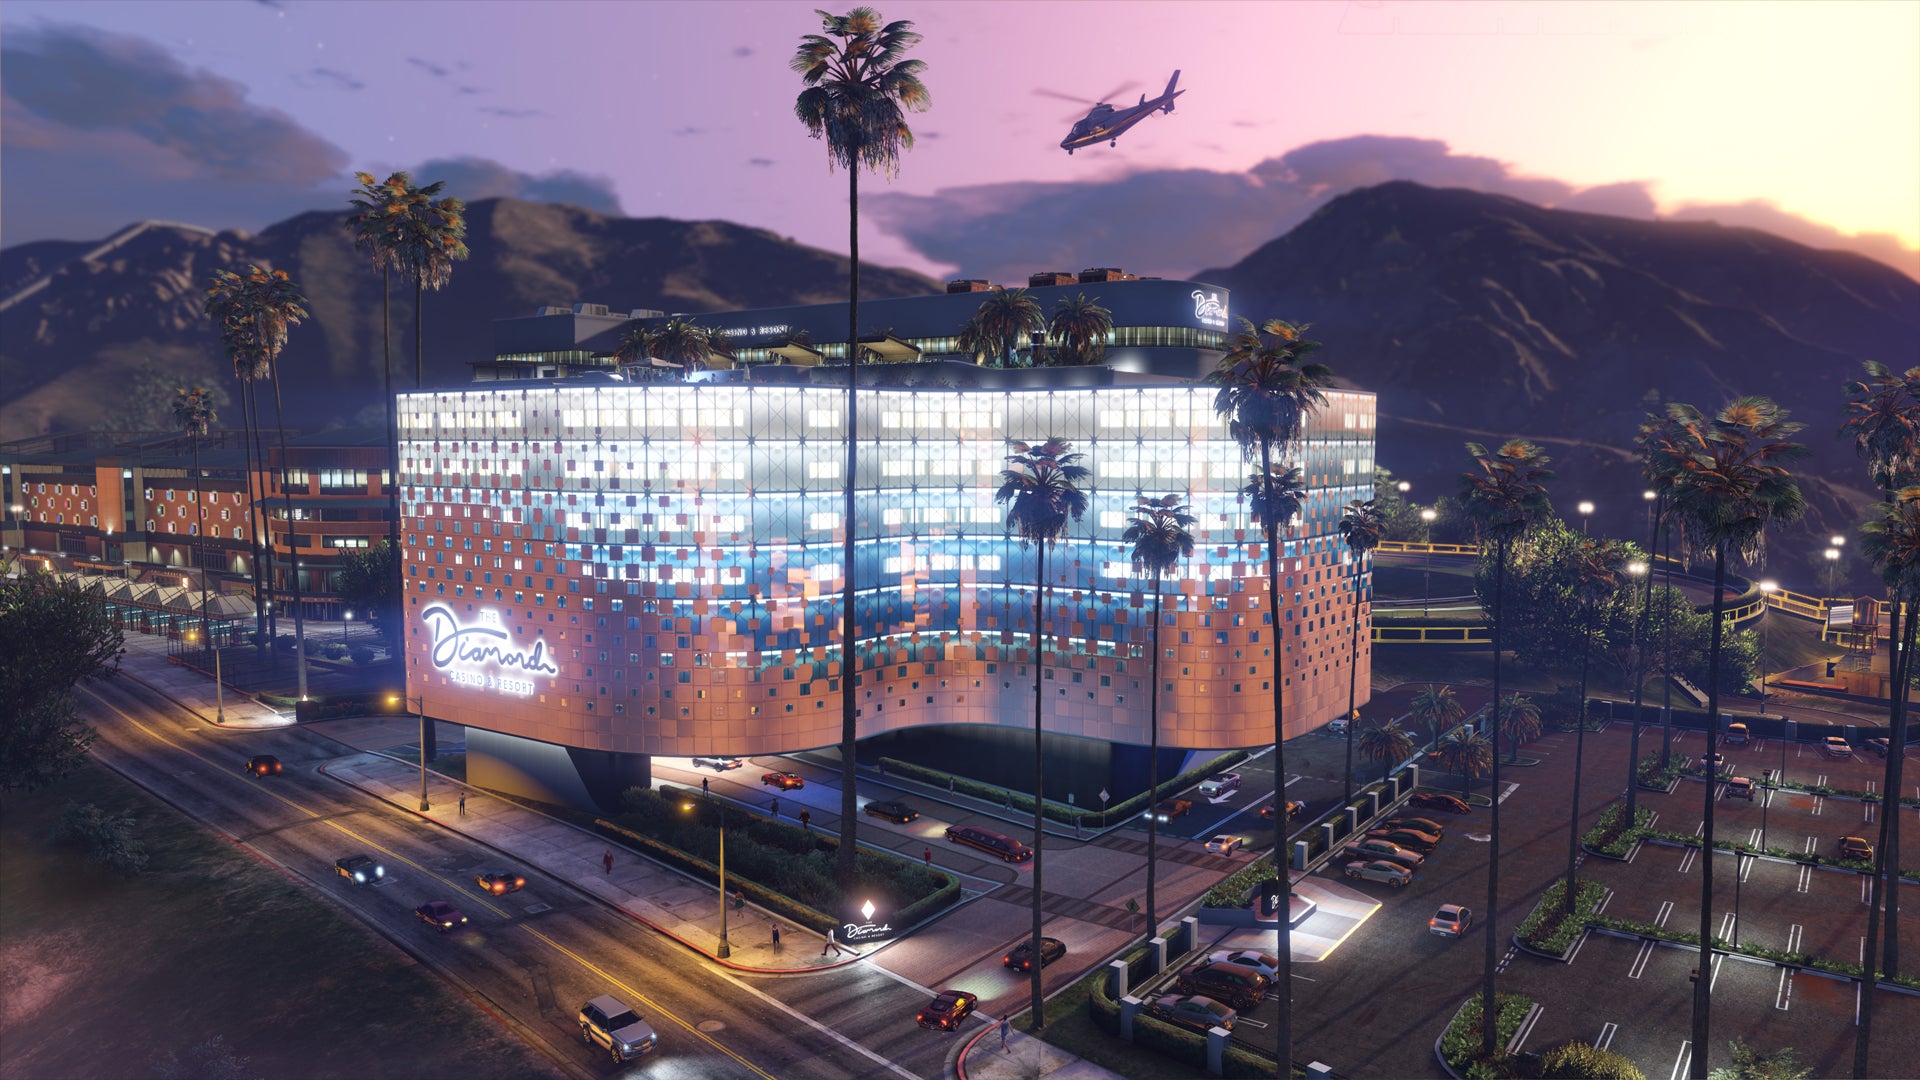 My penthouse is located somewhere in this massive casino.  (Screenshot: Rockstar Games)